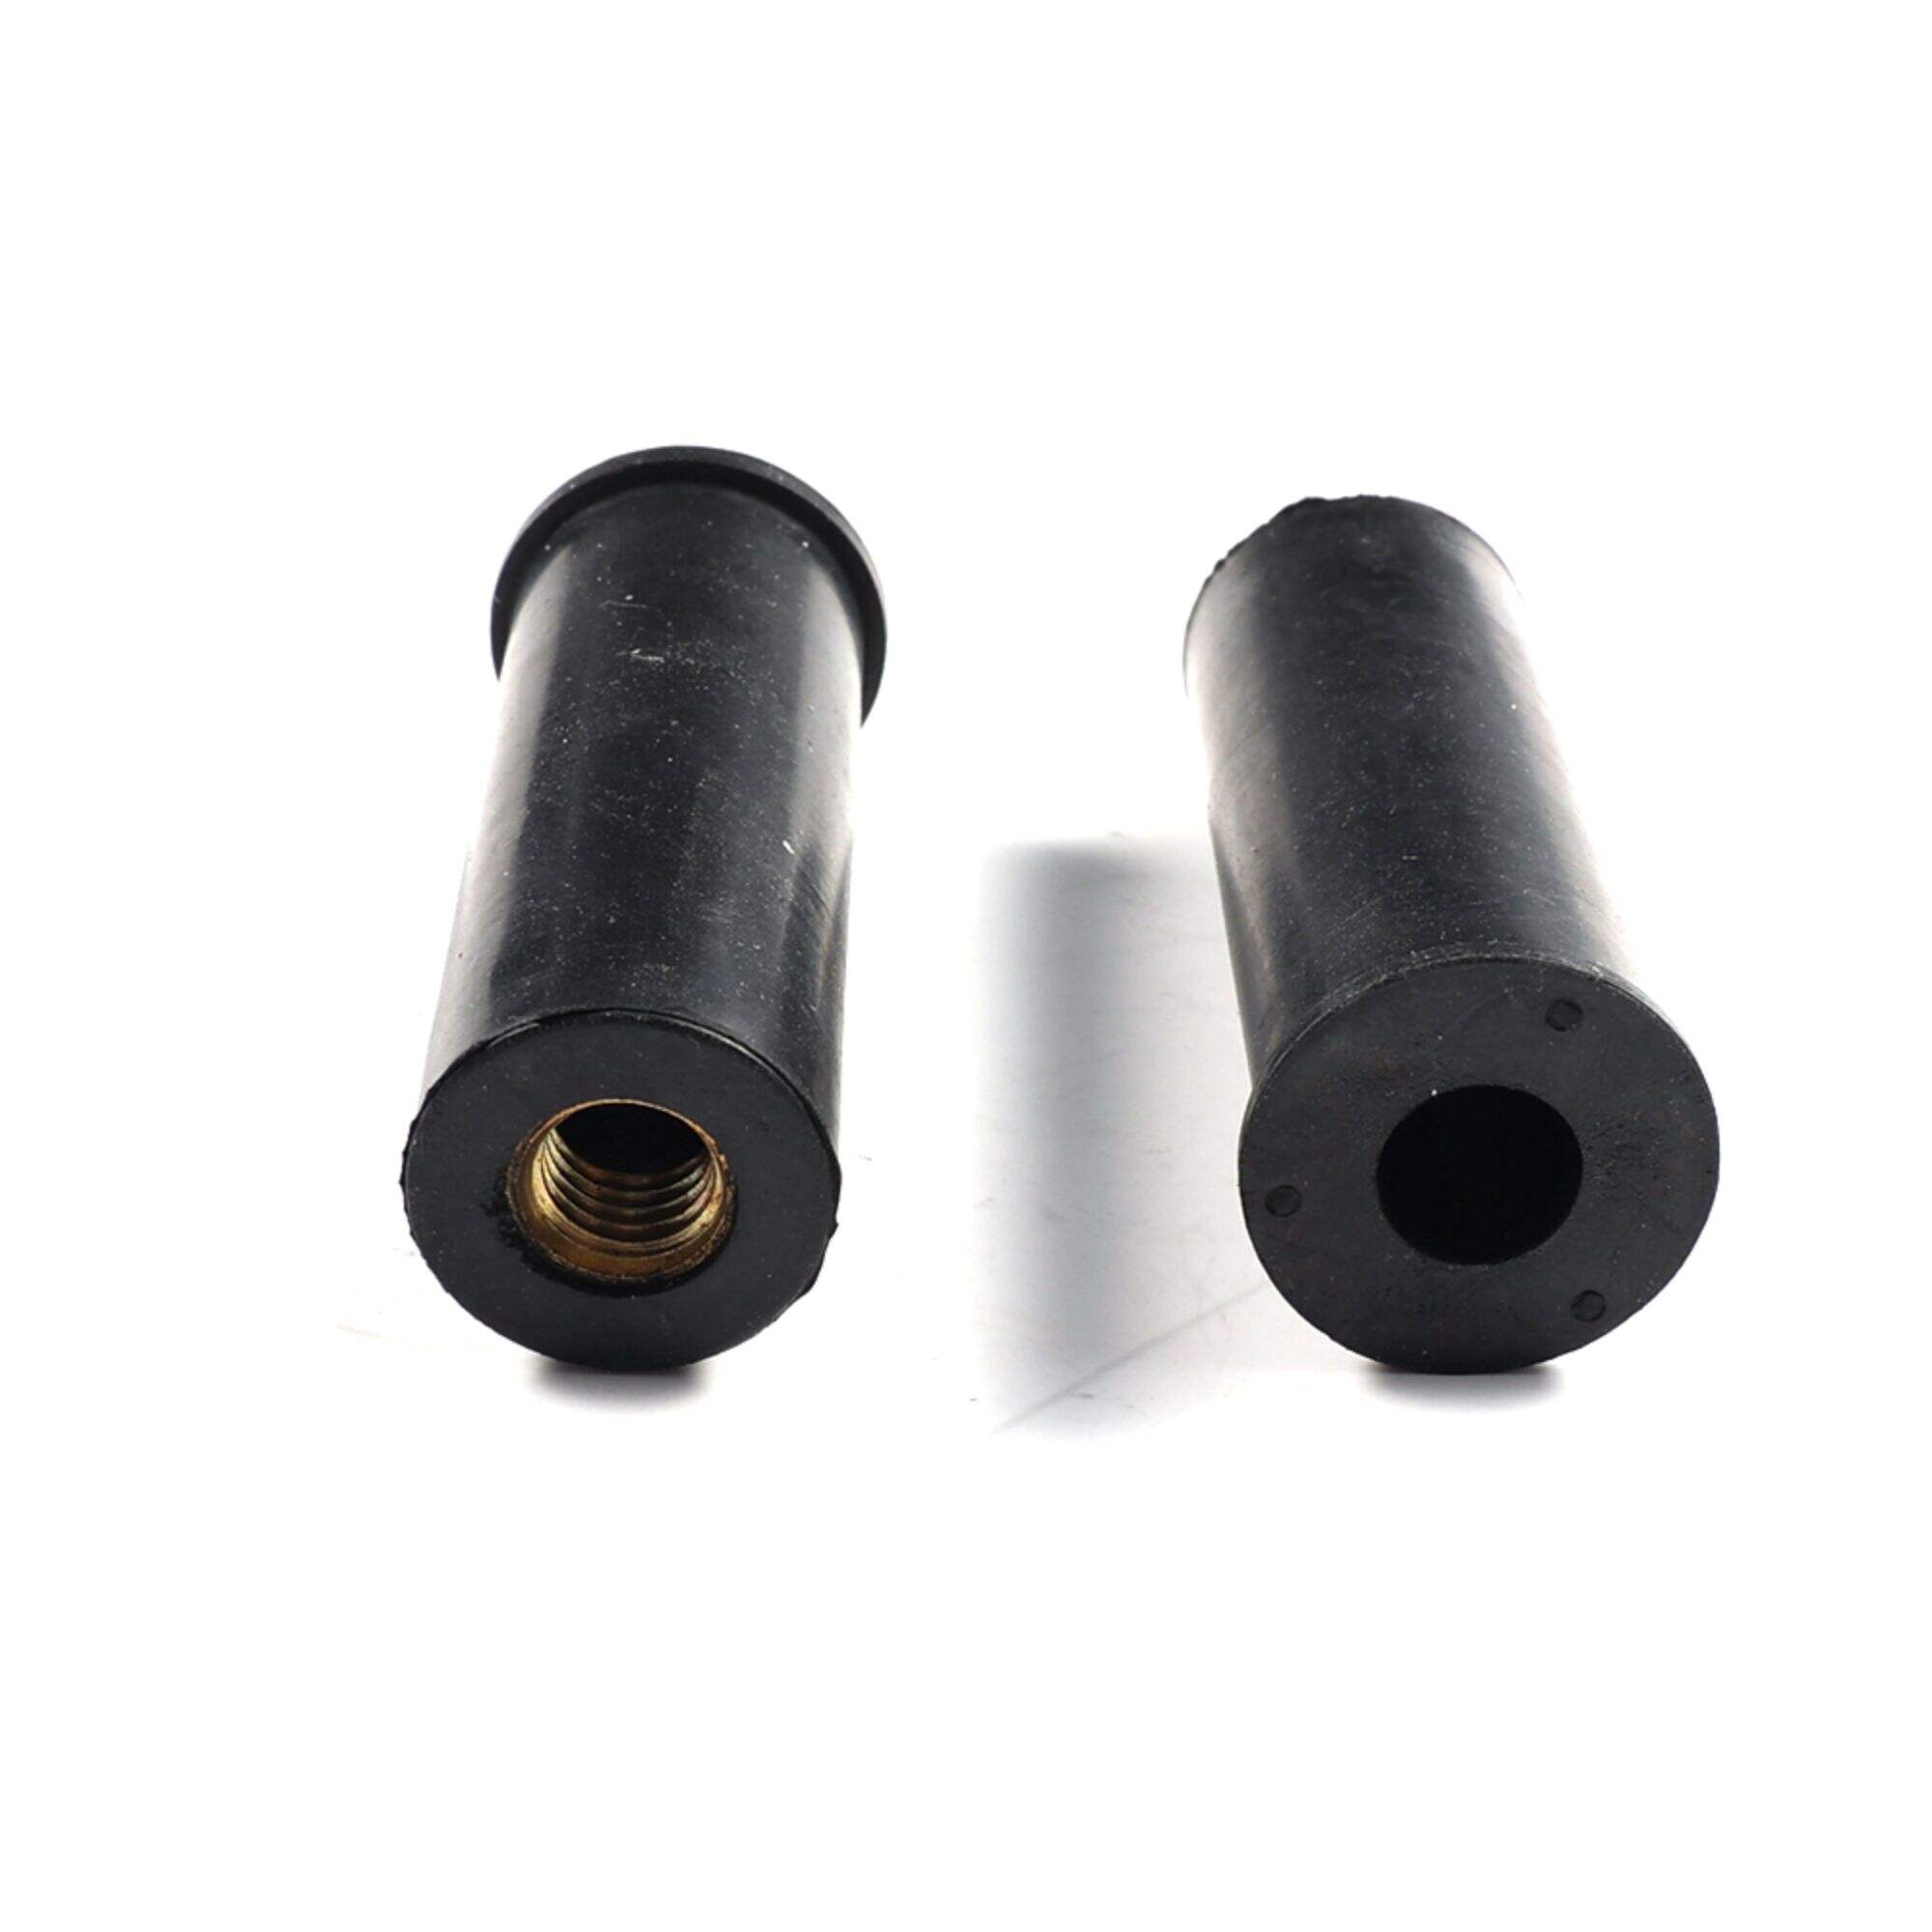 1/4-20 Black 1420 Rubber Nut With Brass Insert Thread Rubber Coupling Bolt And Nut